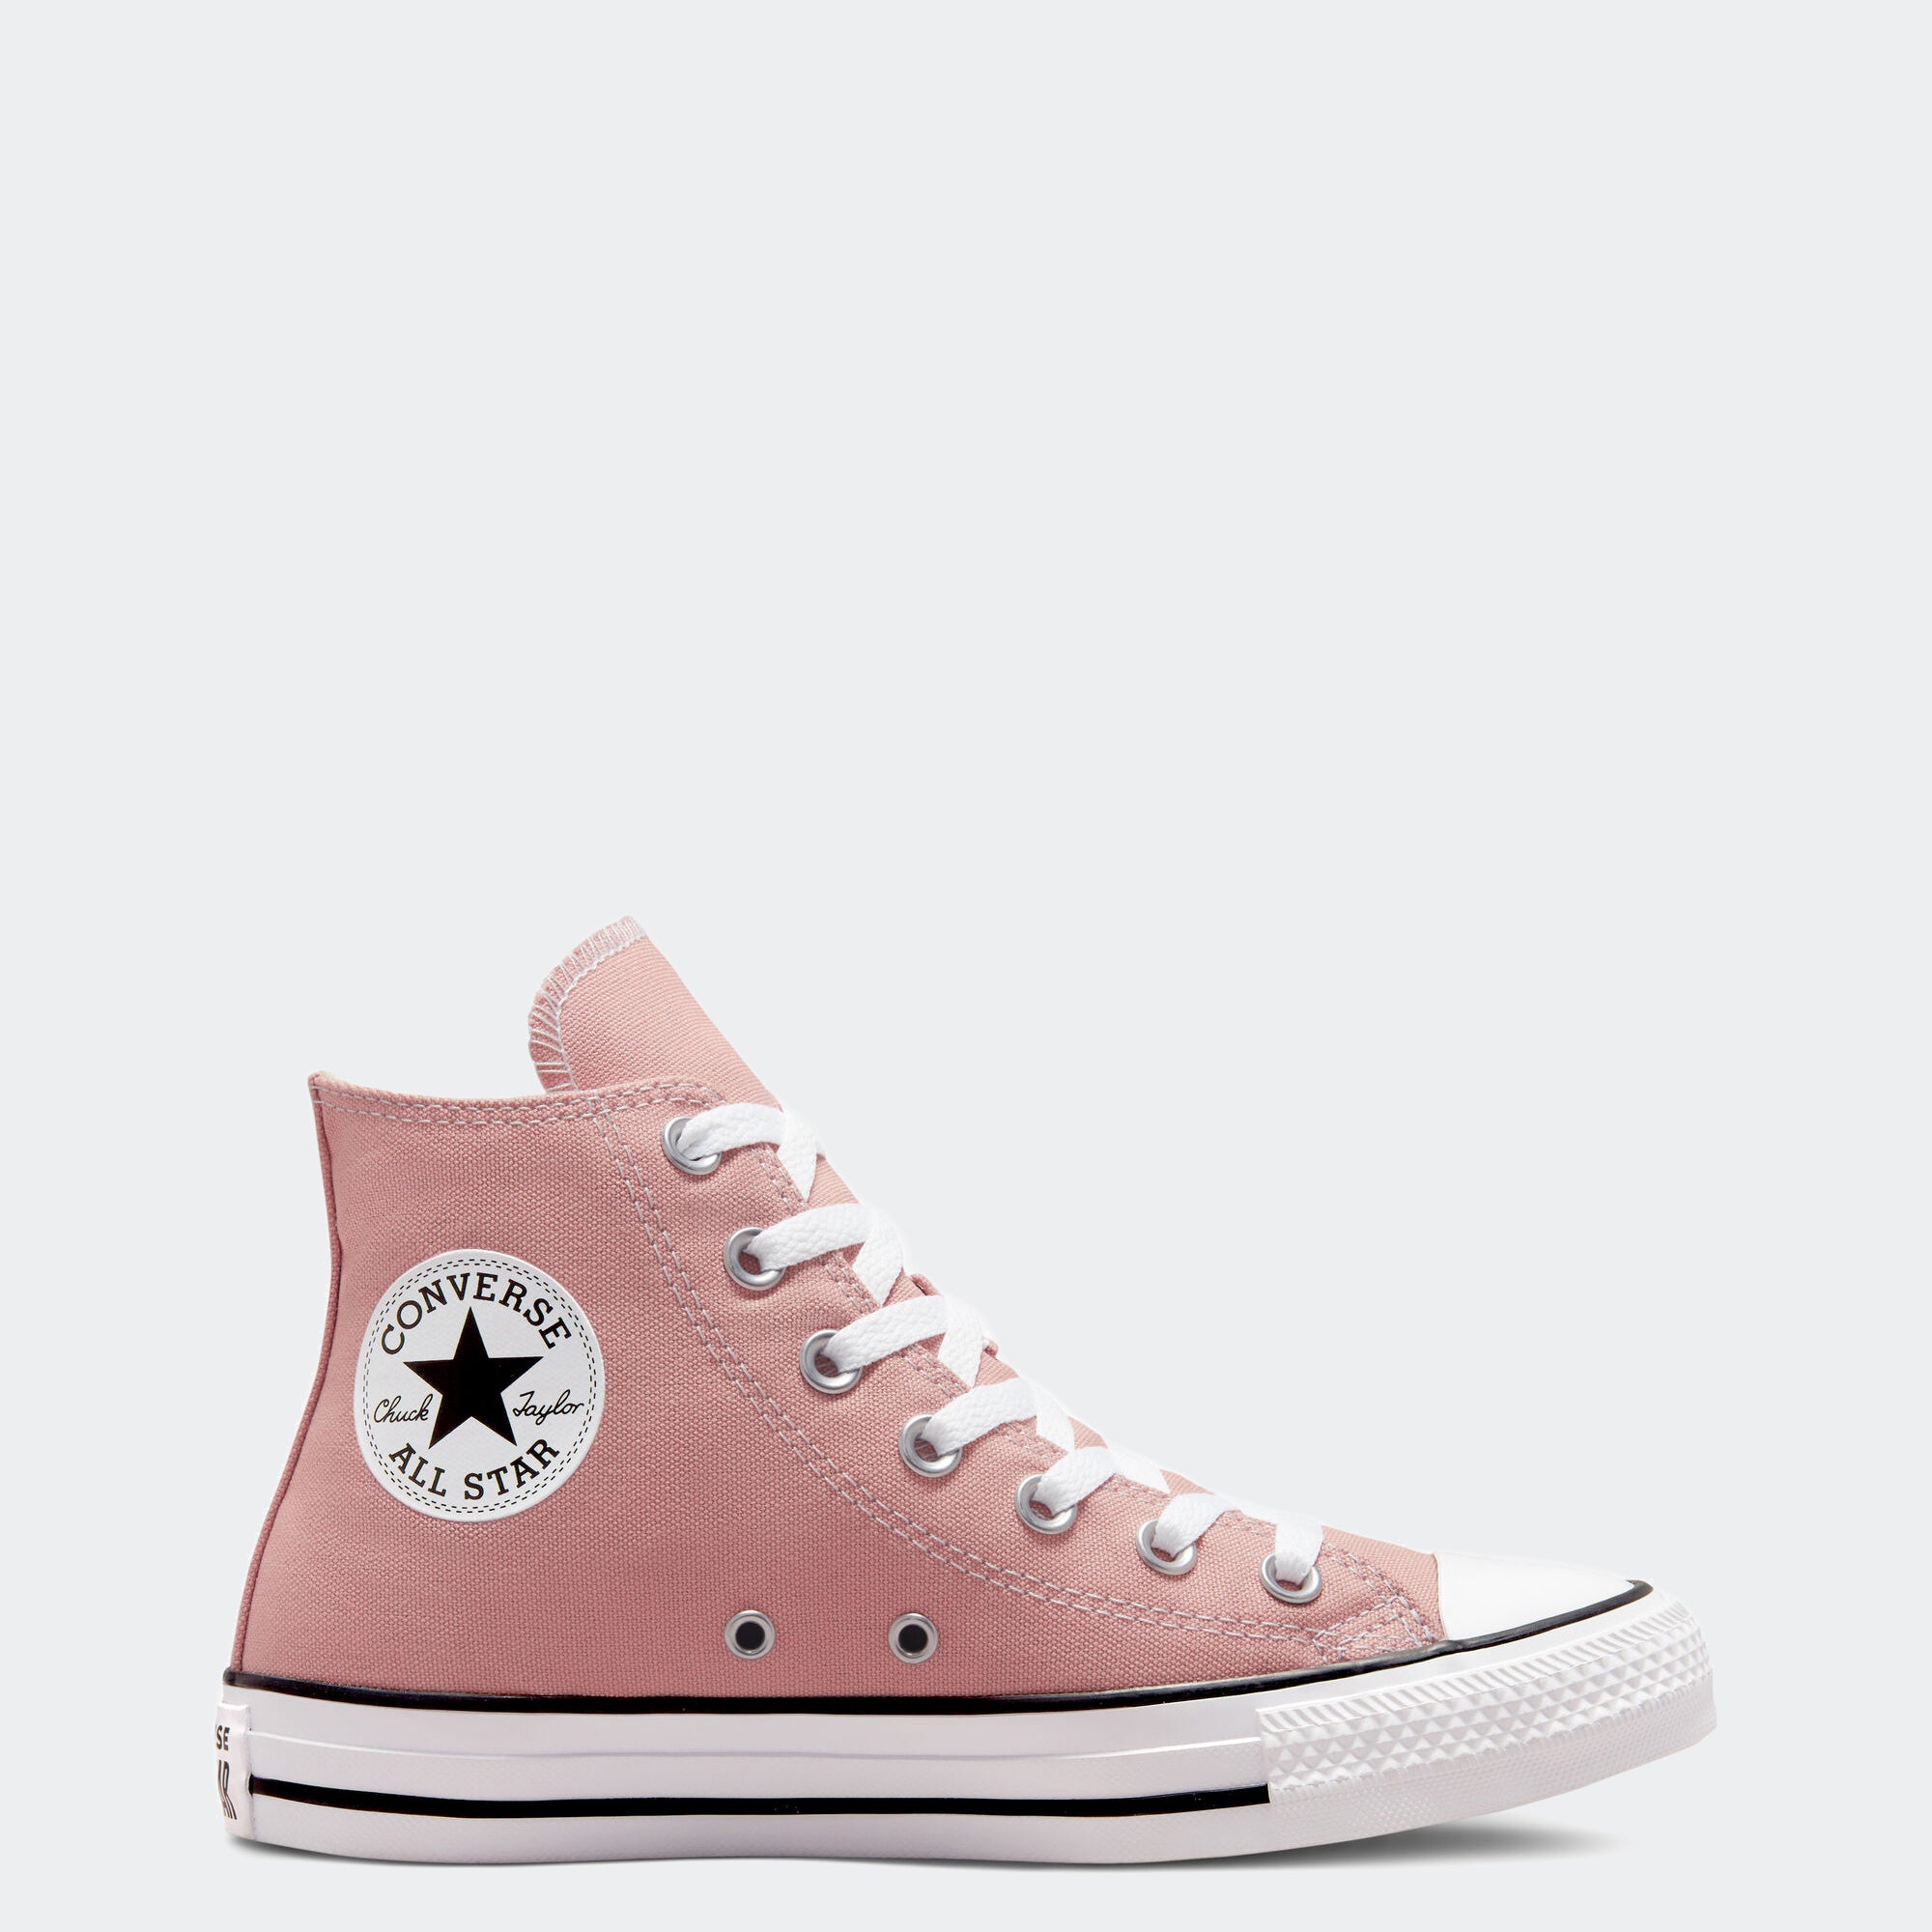 Converse Chuck Taylor All Star Hi Pink | Chicago City Sports